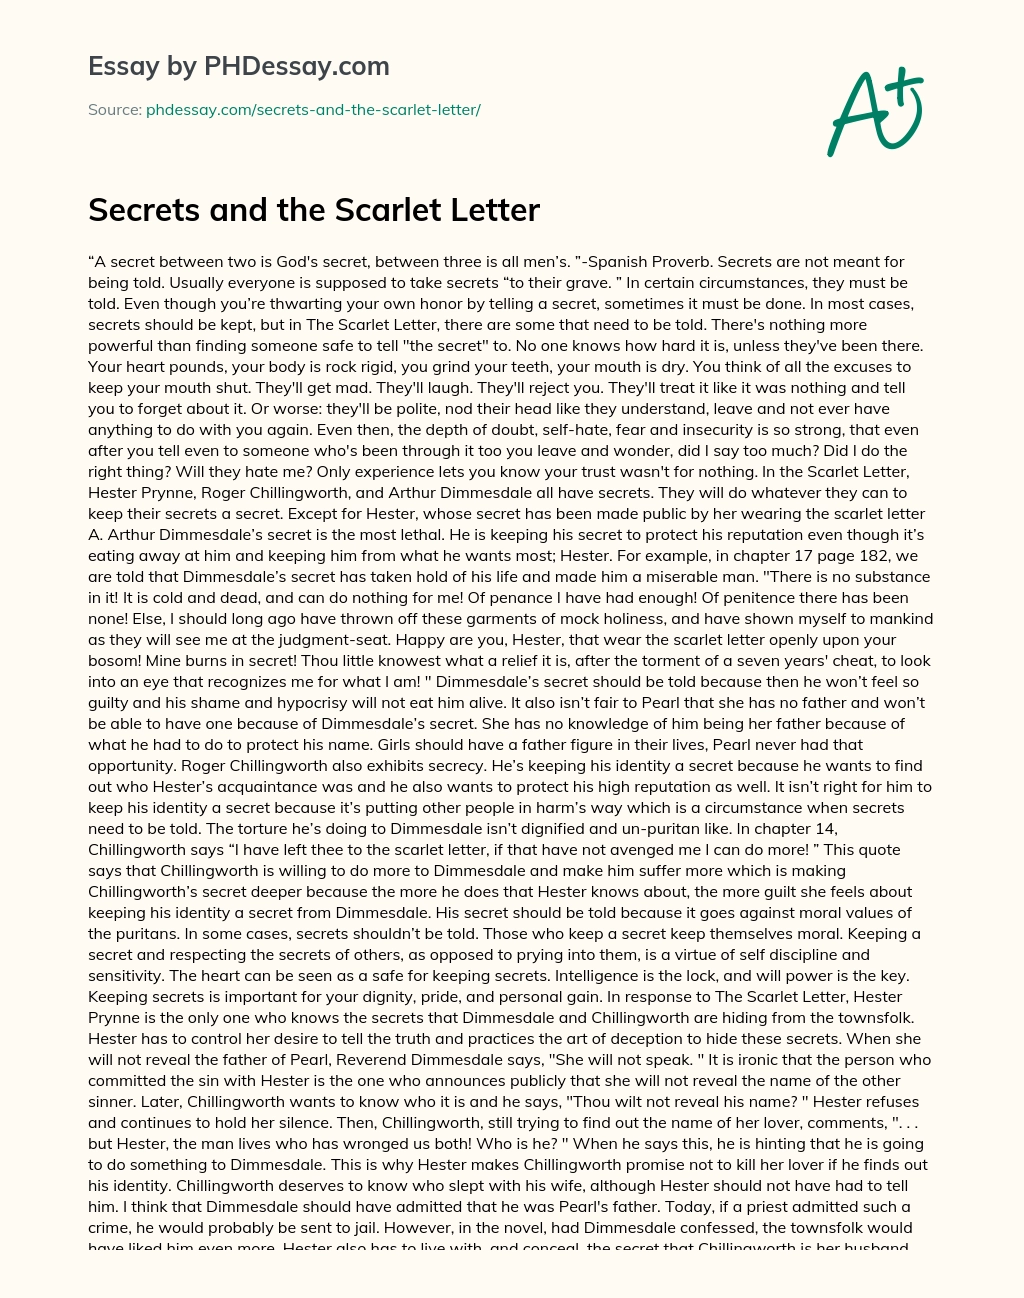 Secrets and the Scarlet Letter essay